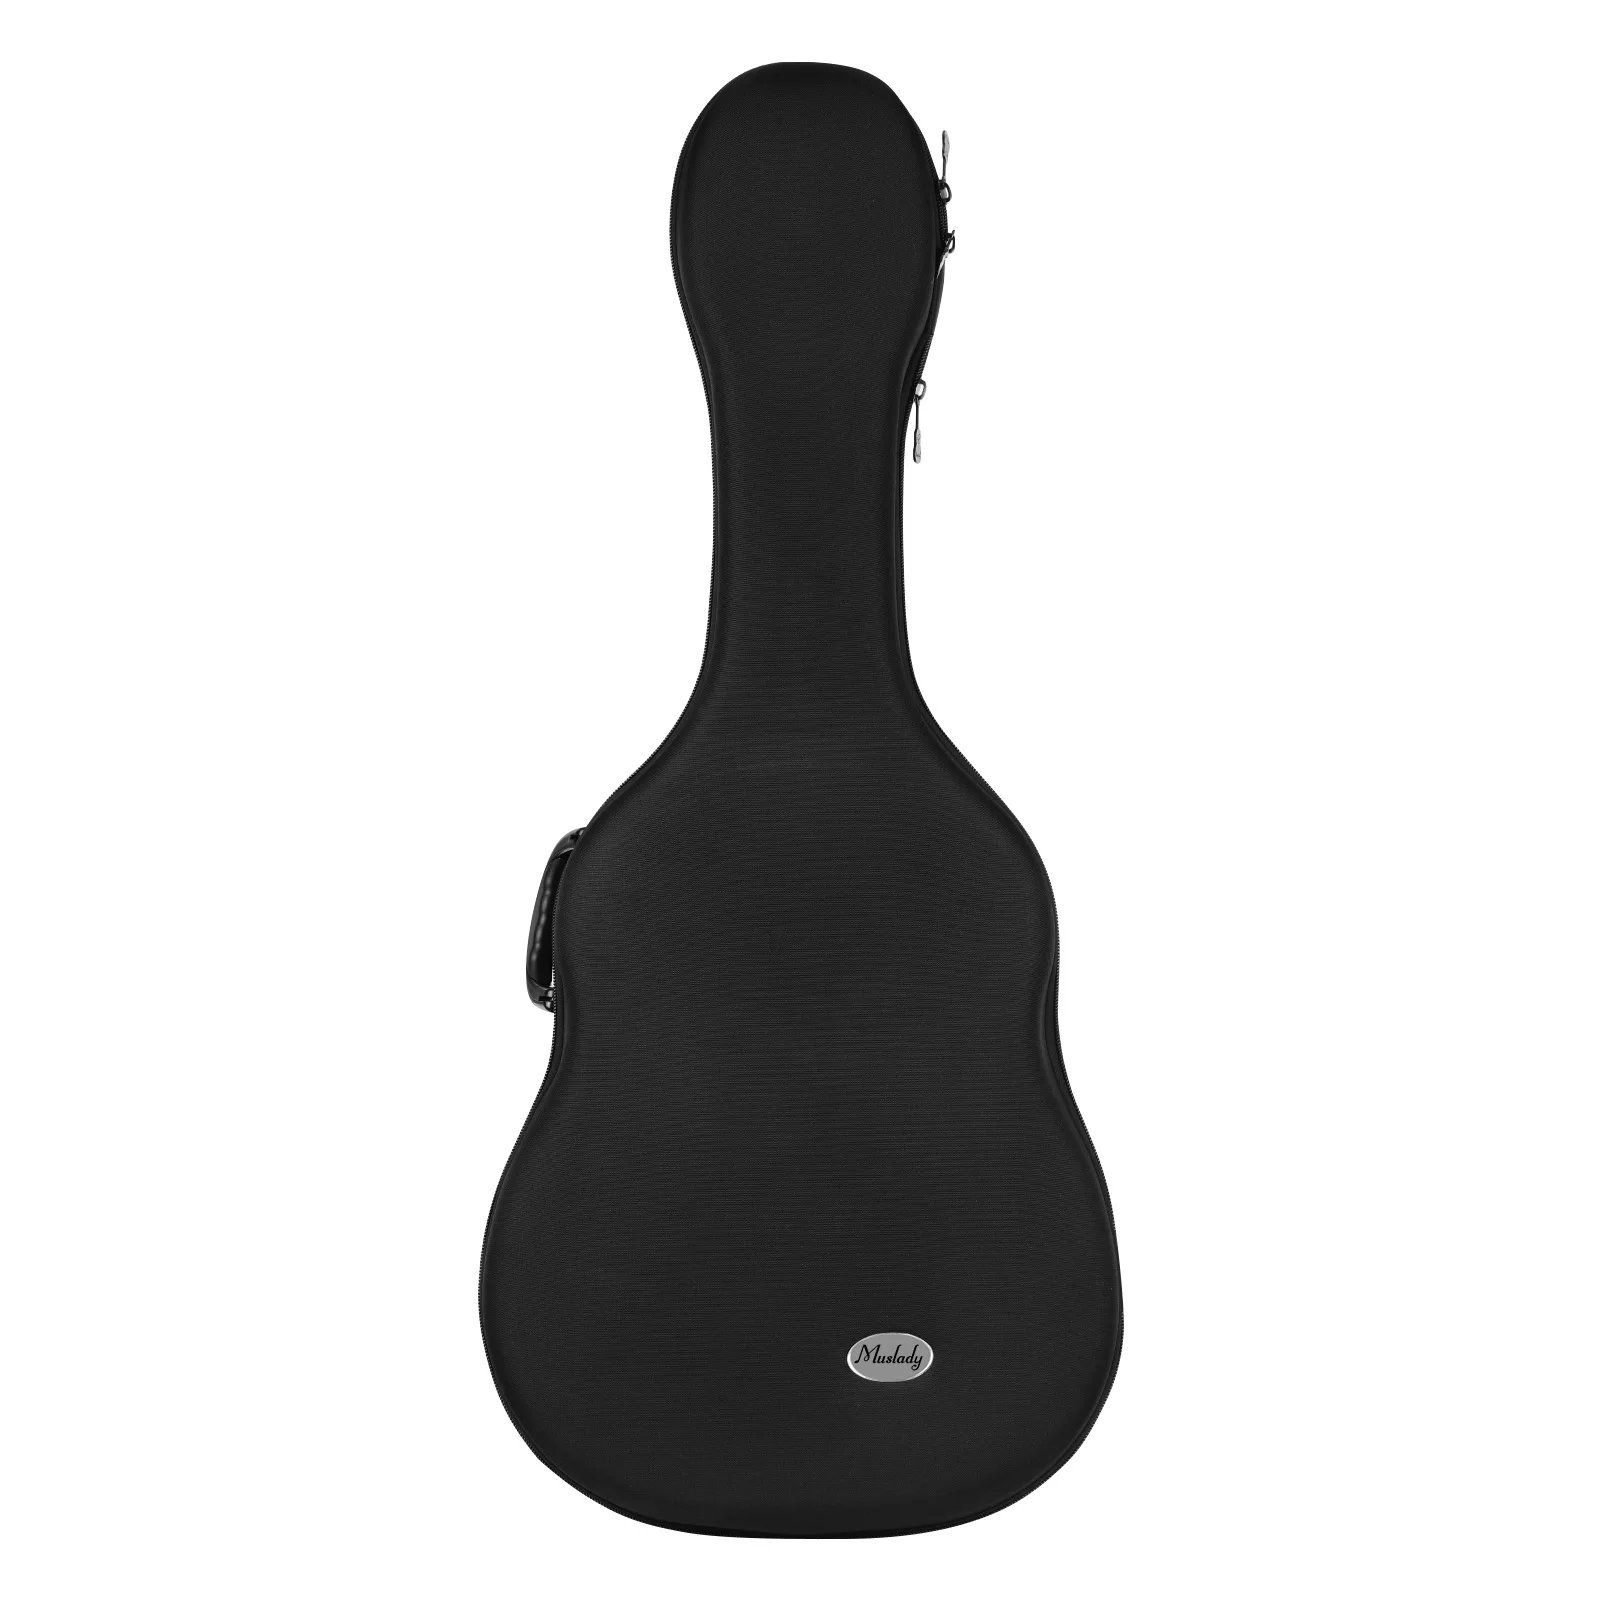 

Muslady 41 Inch Acoustic Guitar Gig Bag Lightweight Hardshell Carrying Case Fabric Exterior Plush Lining with Shoulder Straps